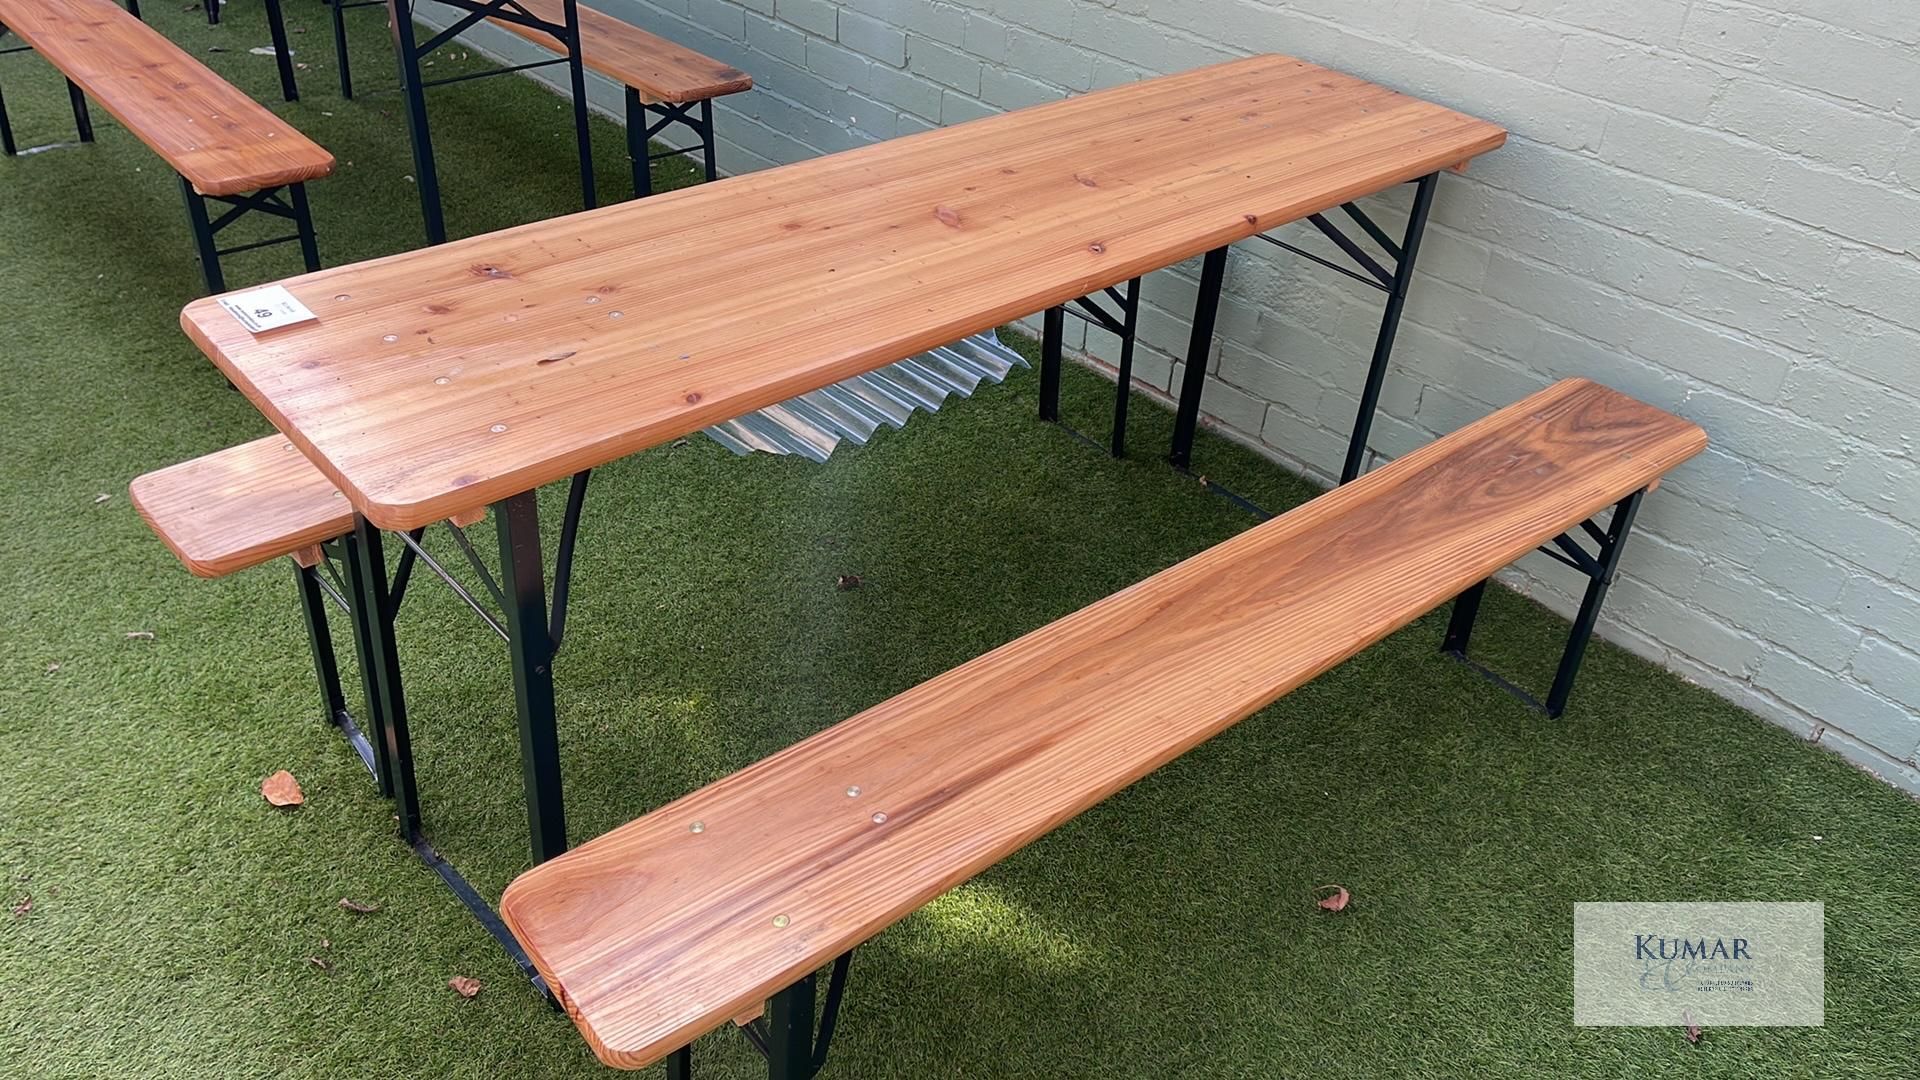 Wooden Top Metal Framed Outdoor Table with 2: Matching Benches - Dimensions Table L - 1780mm x W - - Image 2 of 4